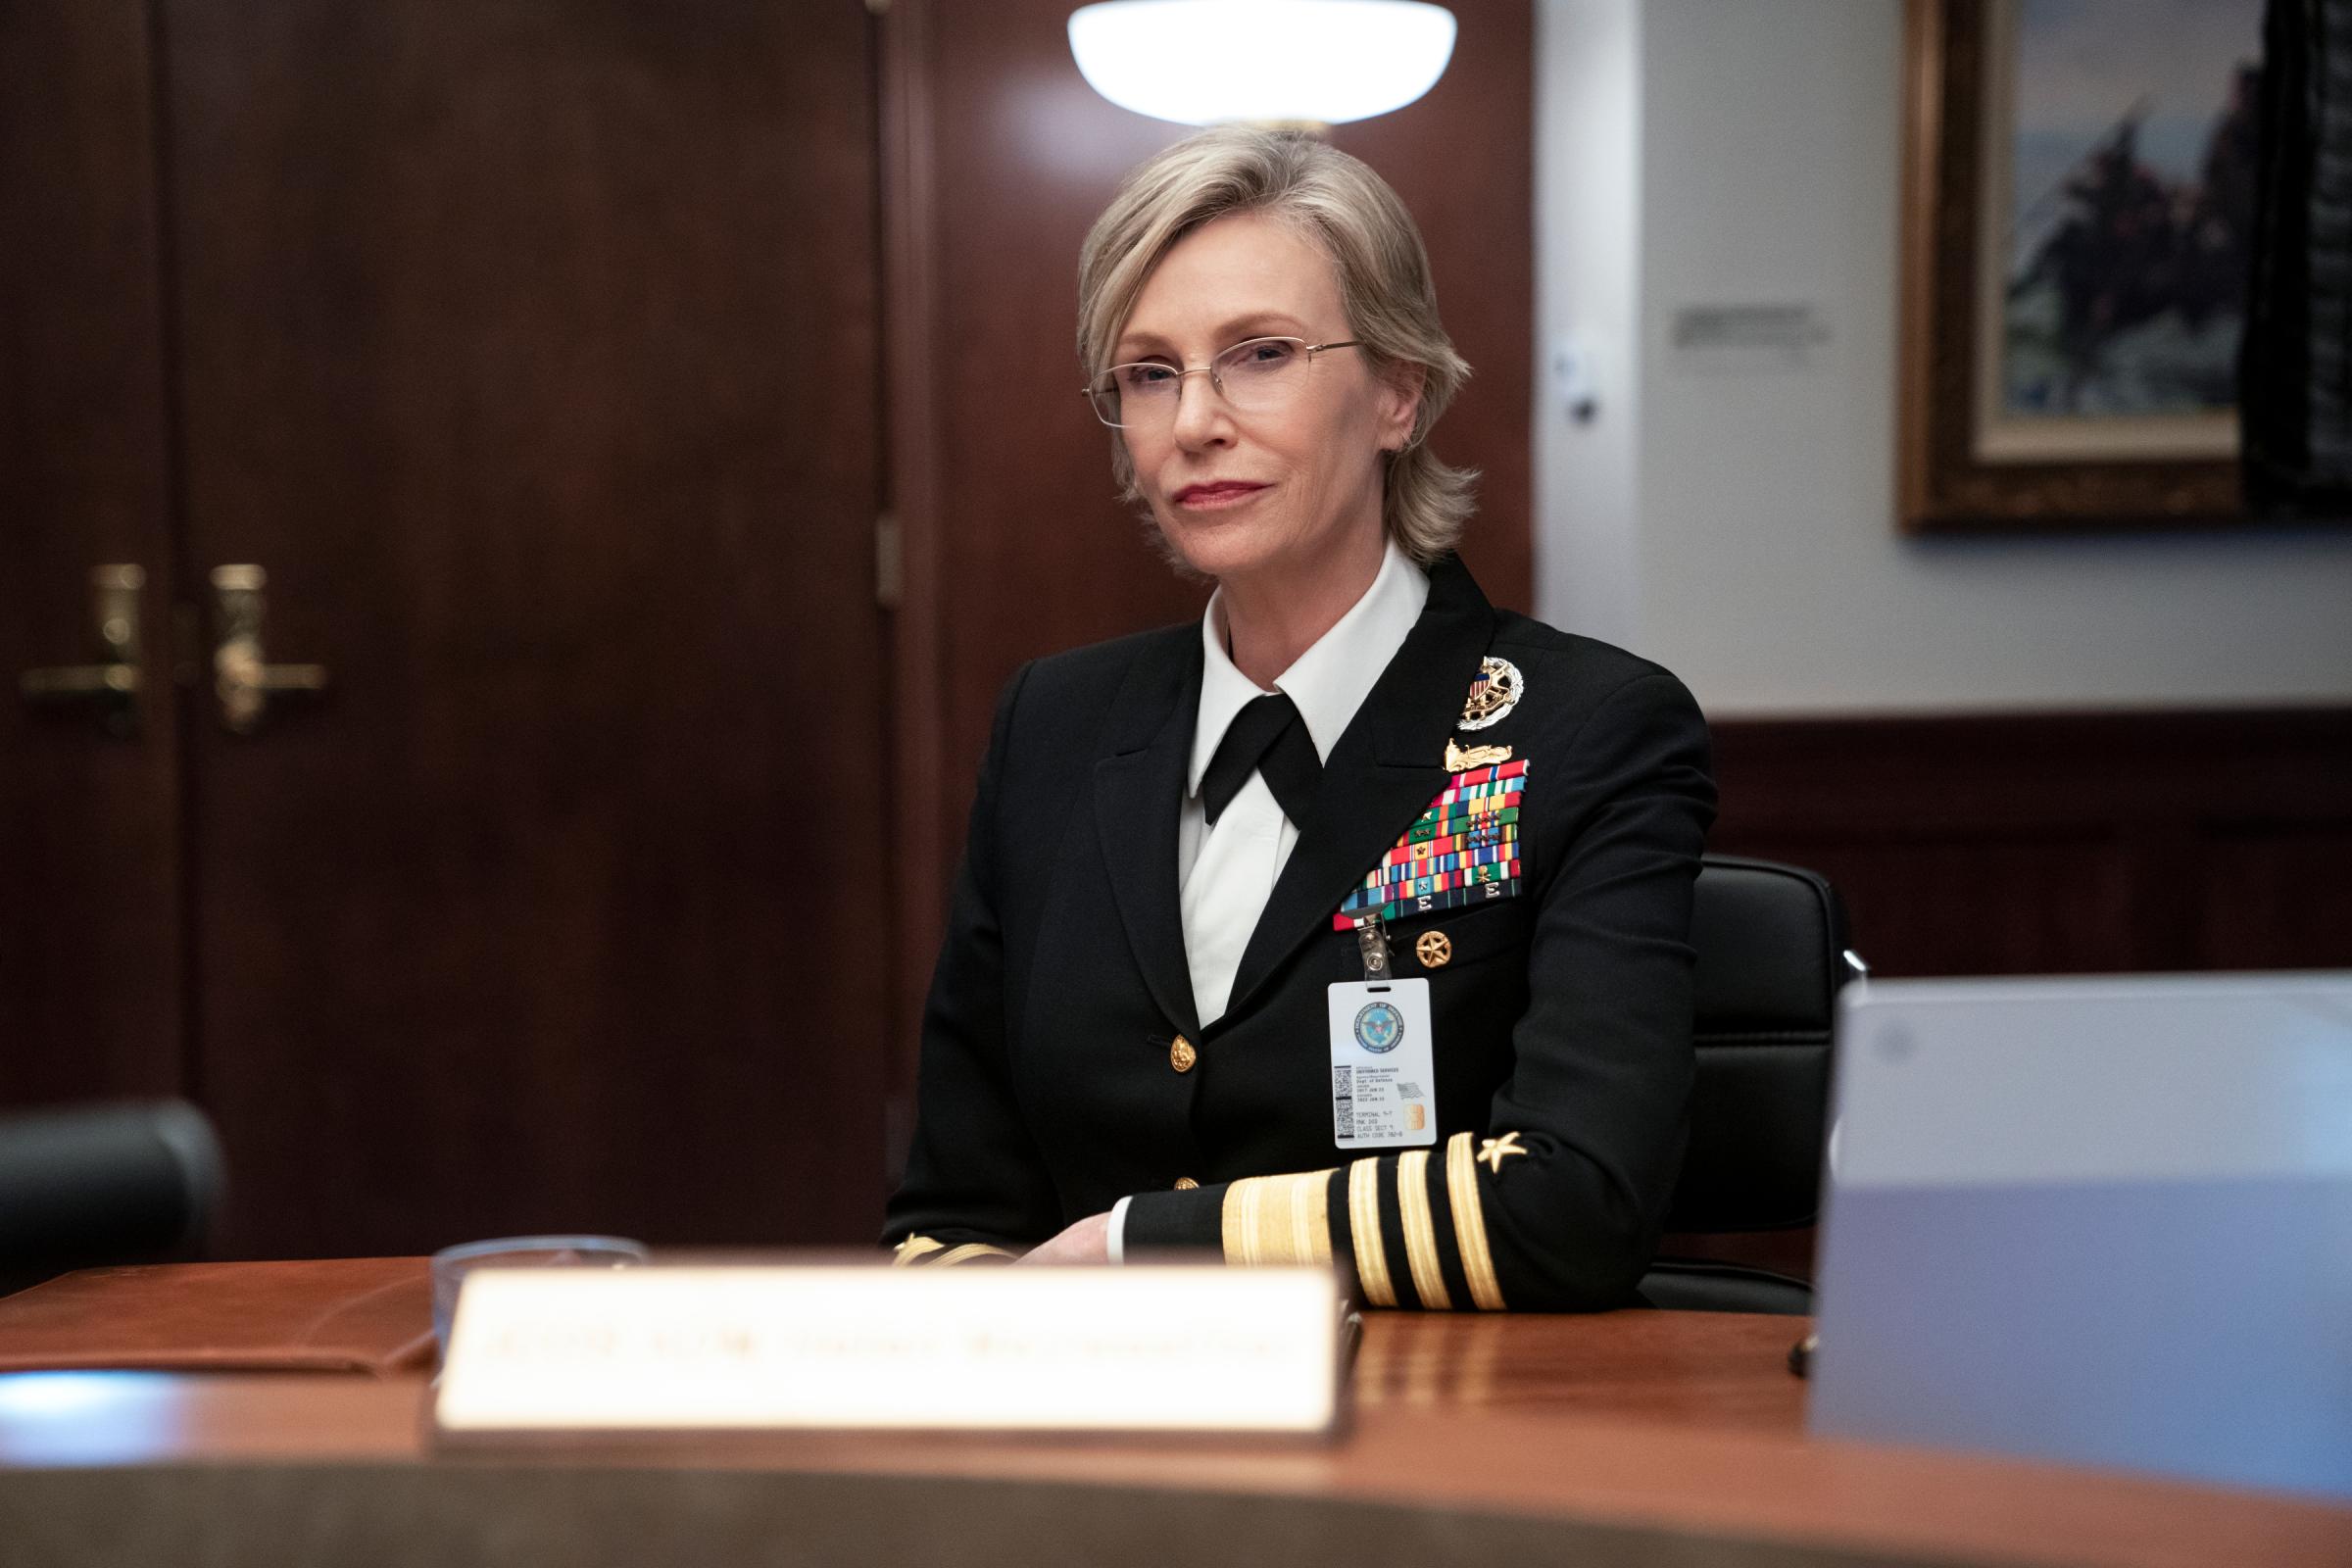 SPACE FORCE (L TO R) JANE LYNCH as NAVY CHIEF OF NAVAL OPS in episode 101 of SPACE FORCE Cr. AARON EPSTEIN/NETFLIX © 2020